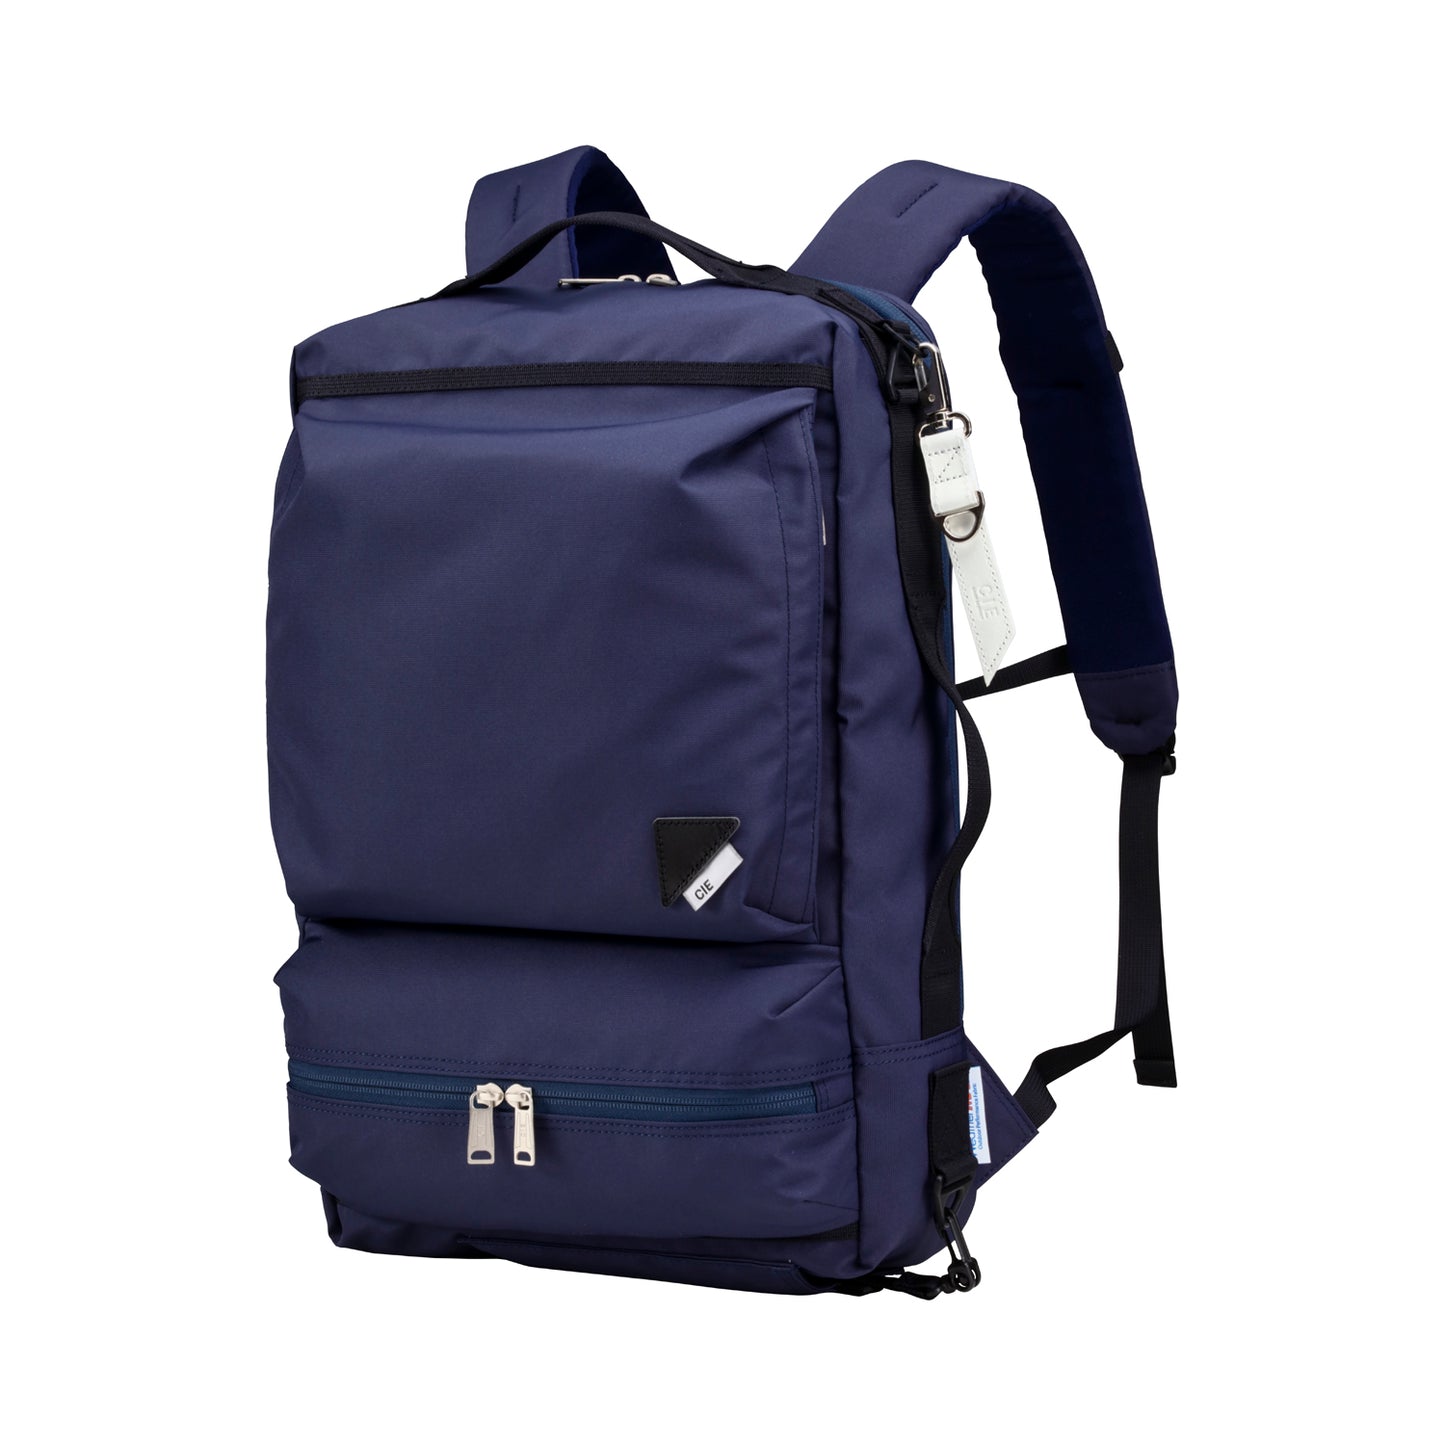 CIE WEATHER 2WAY BACKPACK